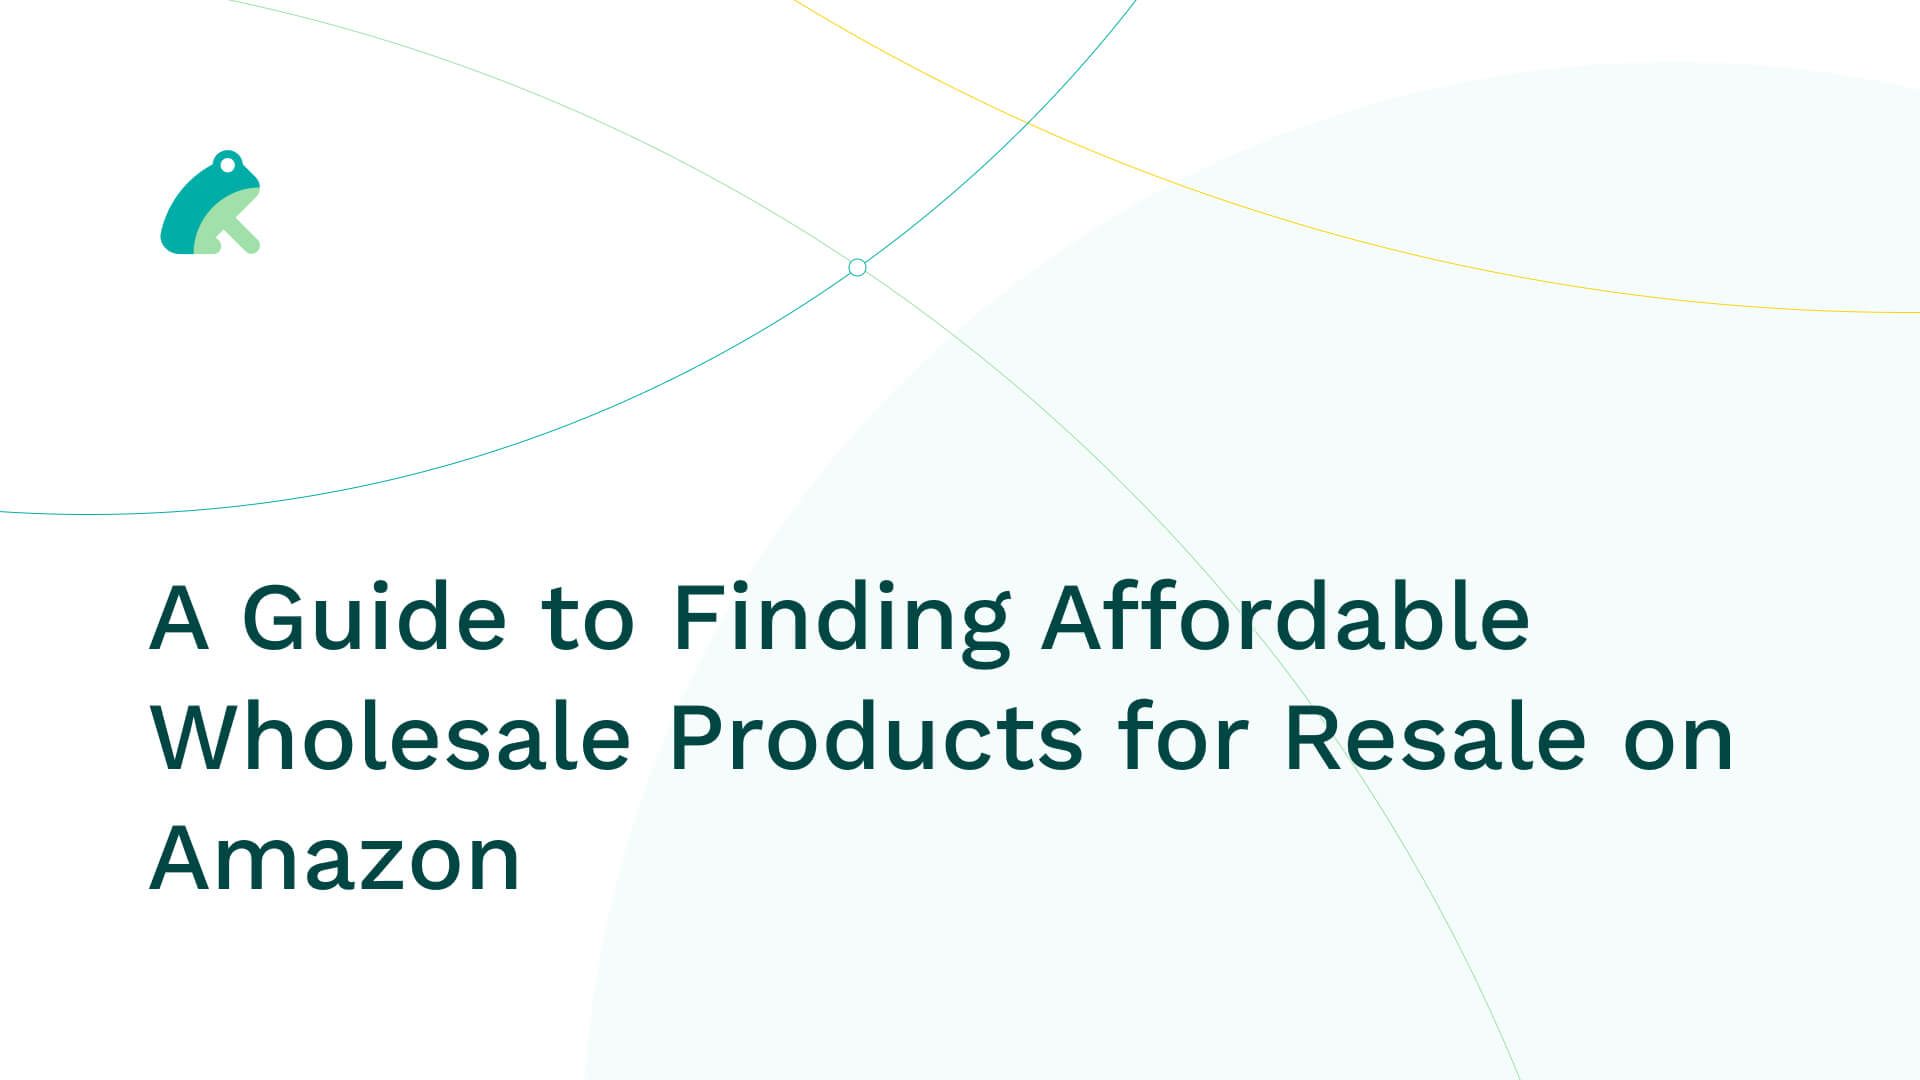 A Guide to Finding Affordable Wholesale Products for Resale on Amazon